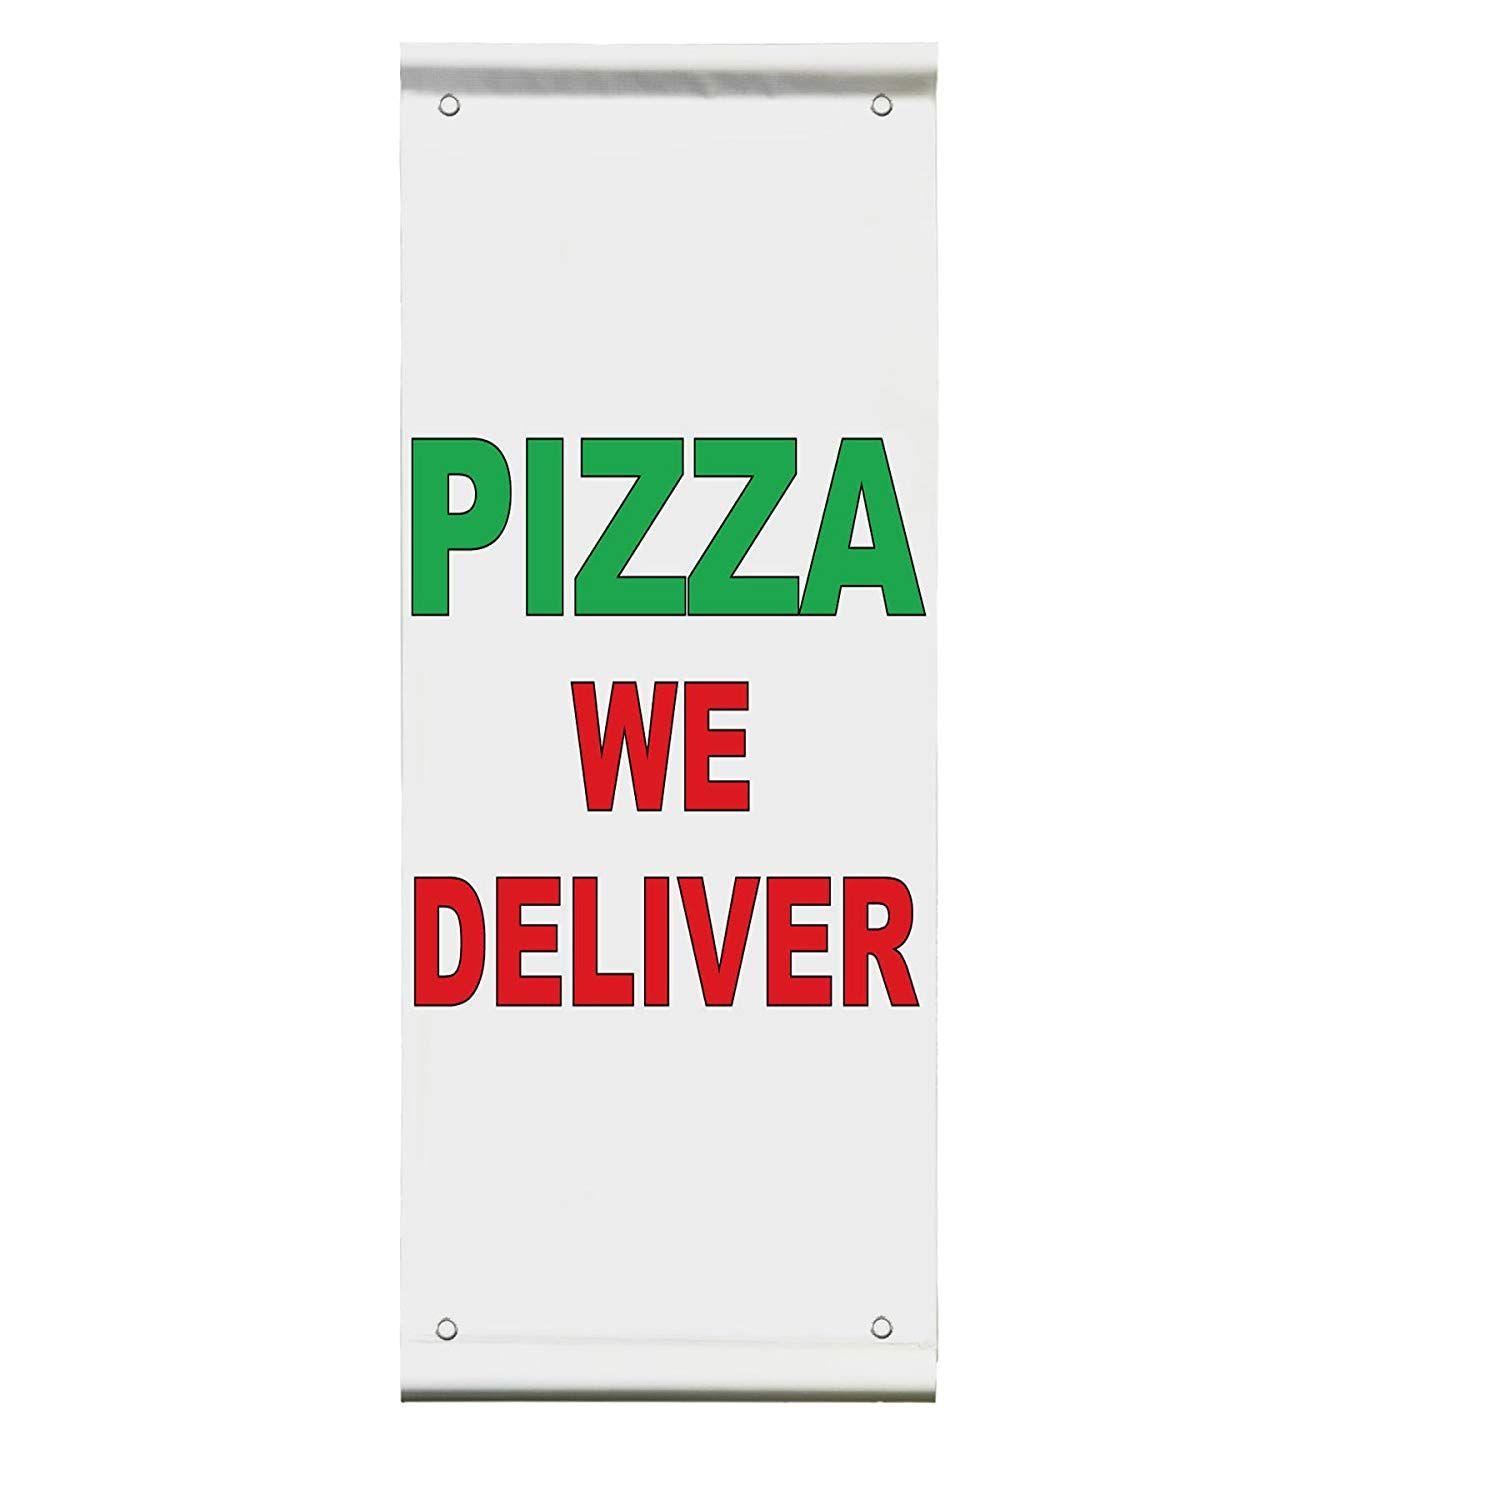 Red and Green Banner Restaurant Logo - Amazon.com : Pizza We Deliver Green Red Bar Restaurant Double Sided ...